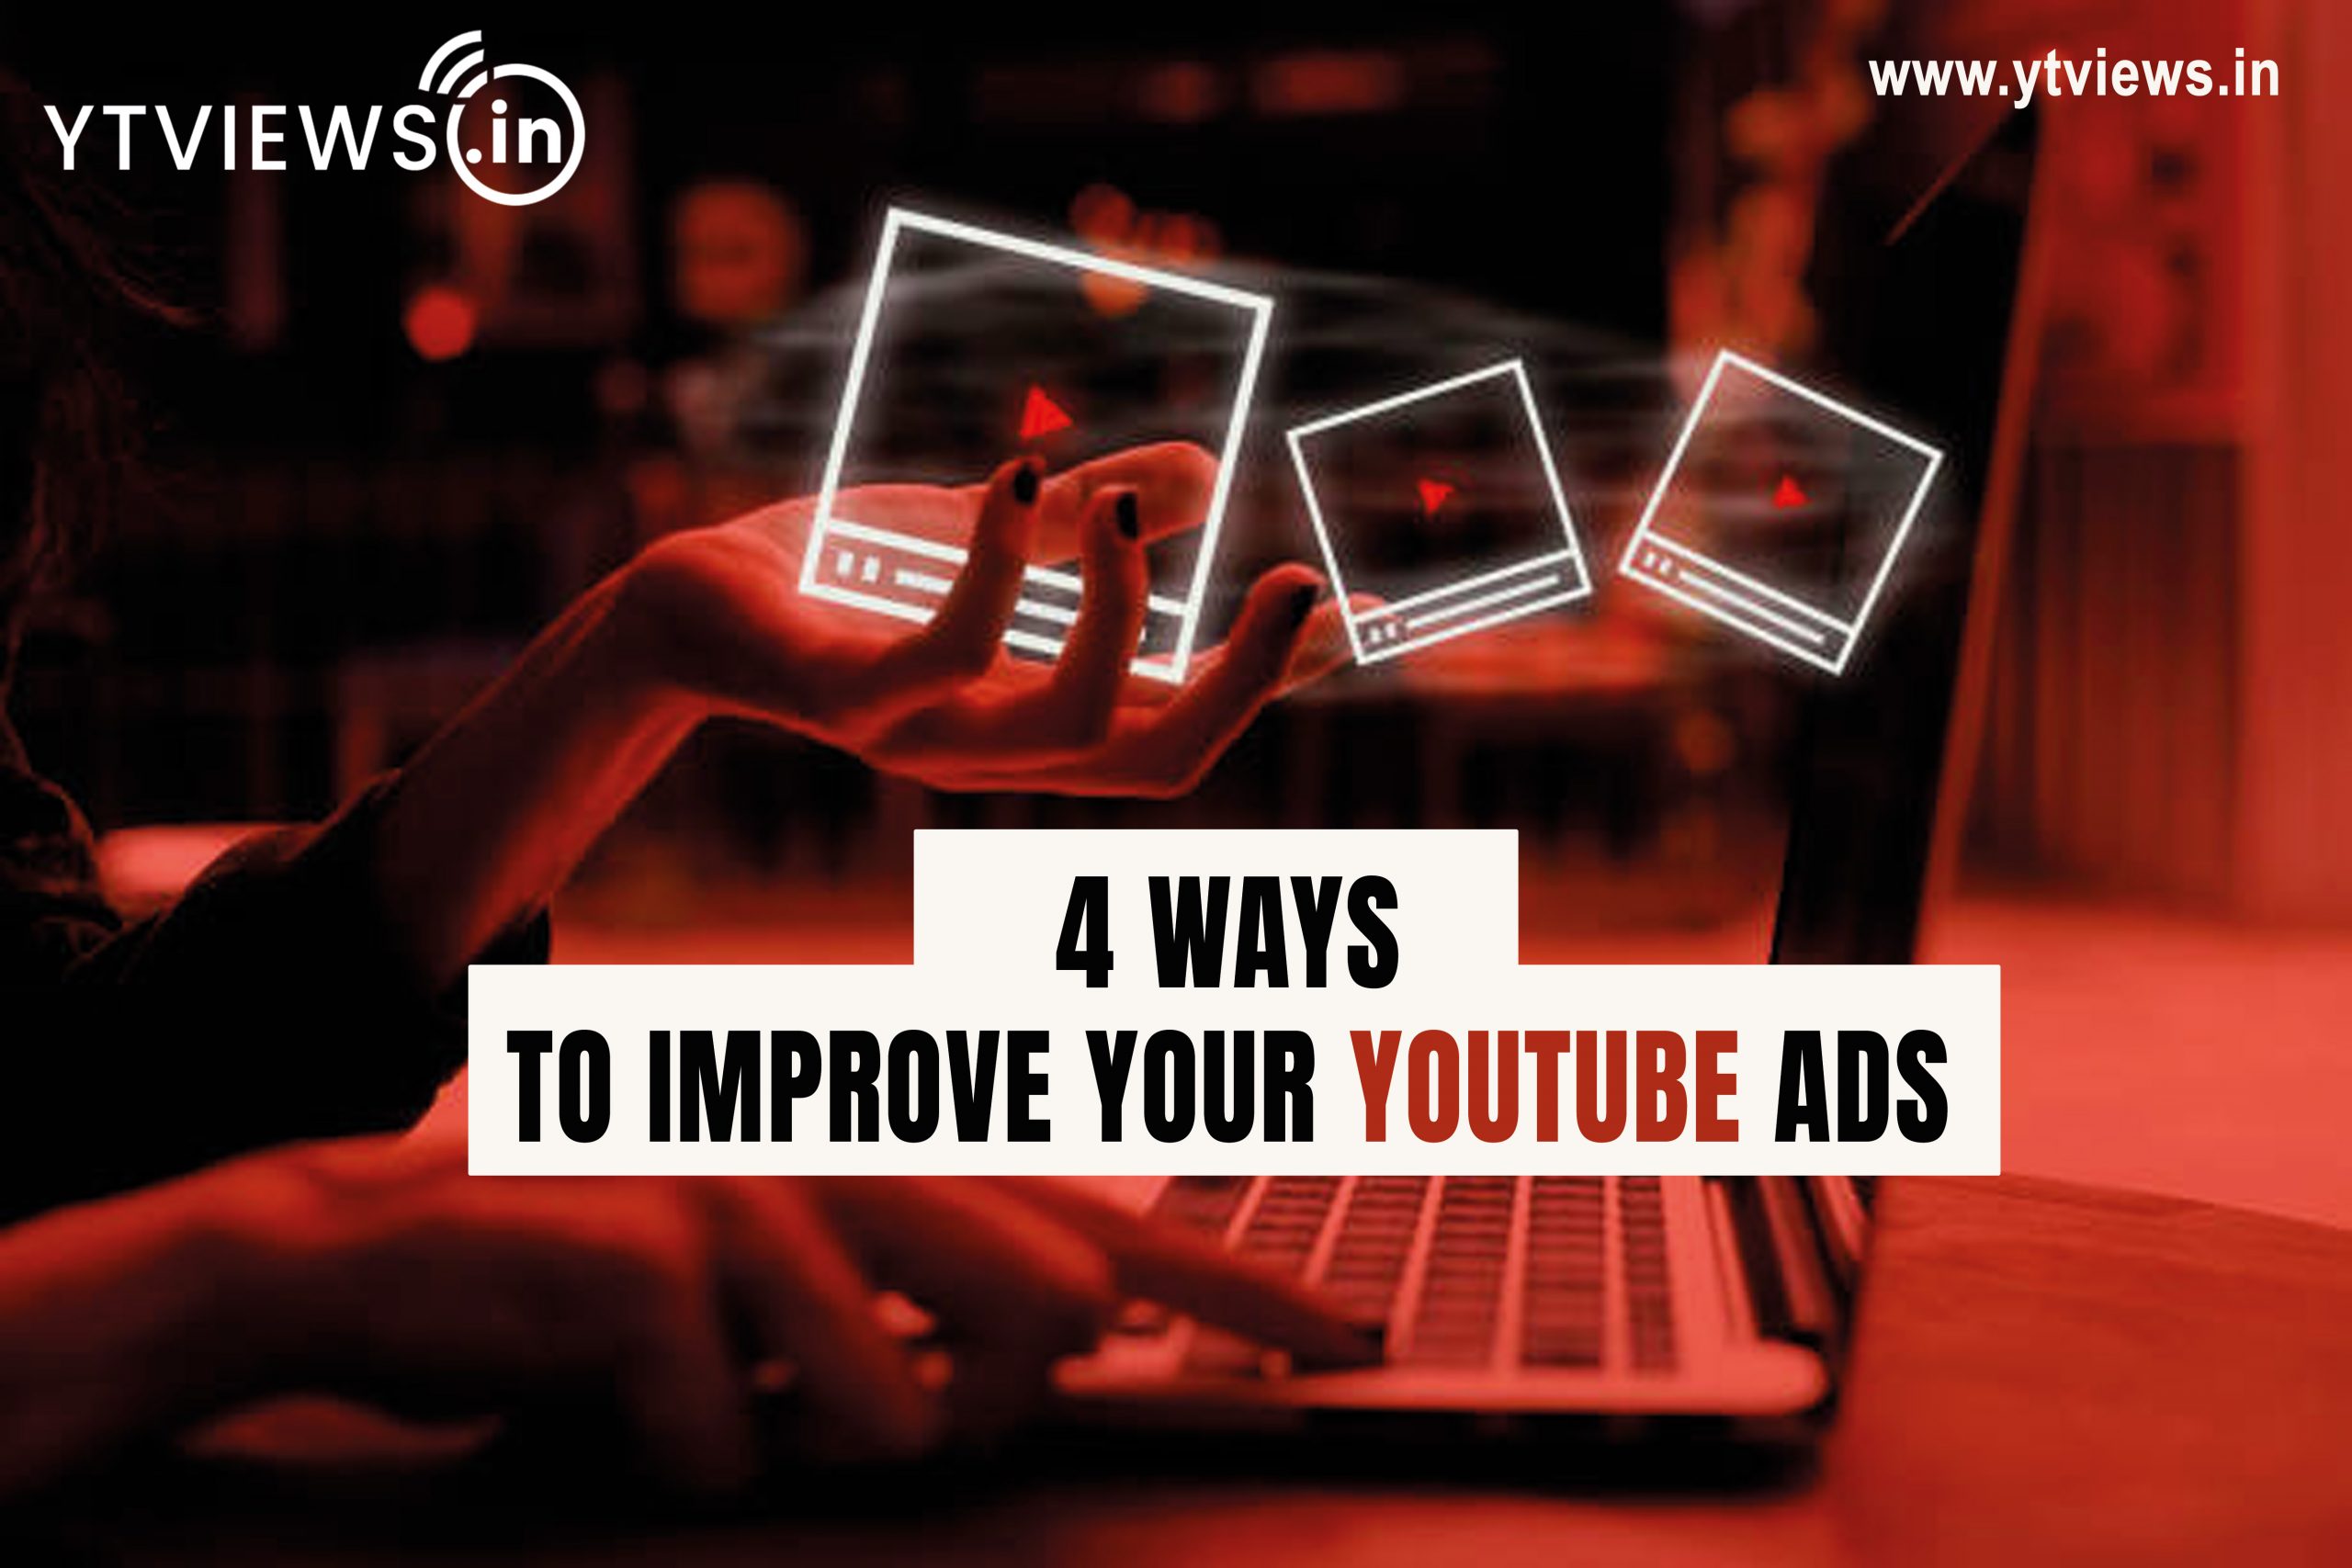 4 ways to improve your Youtube ads